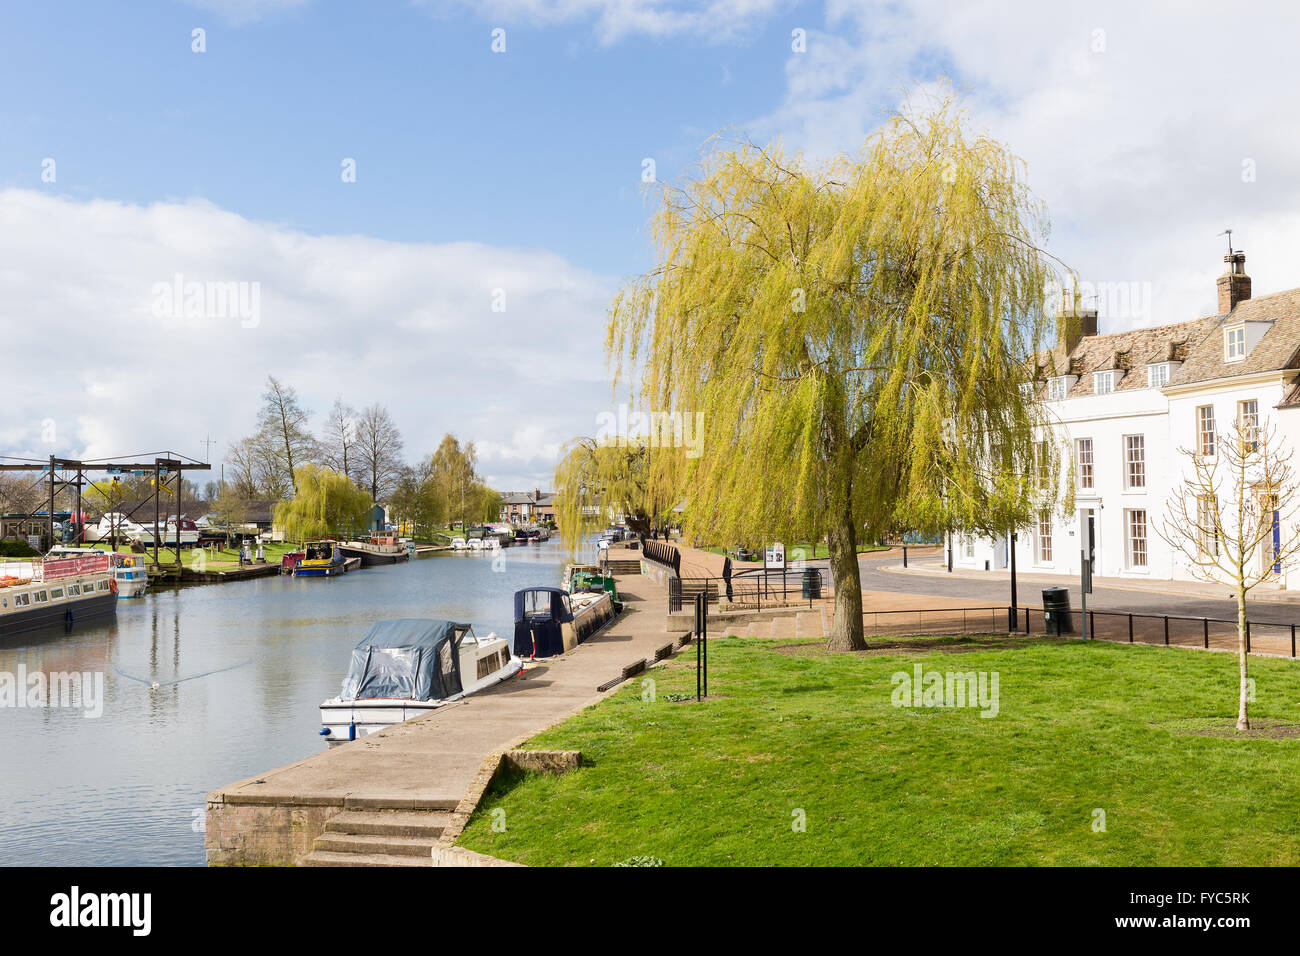 Sonniger Tag am Fluss in Ely, Cambridgeshire, England Stockfoto